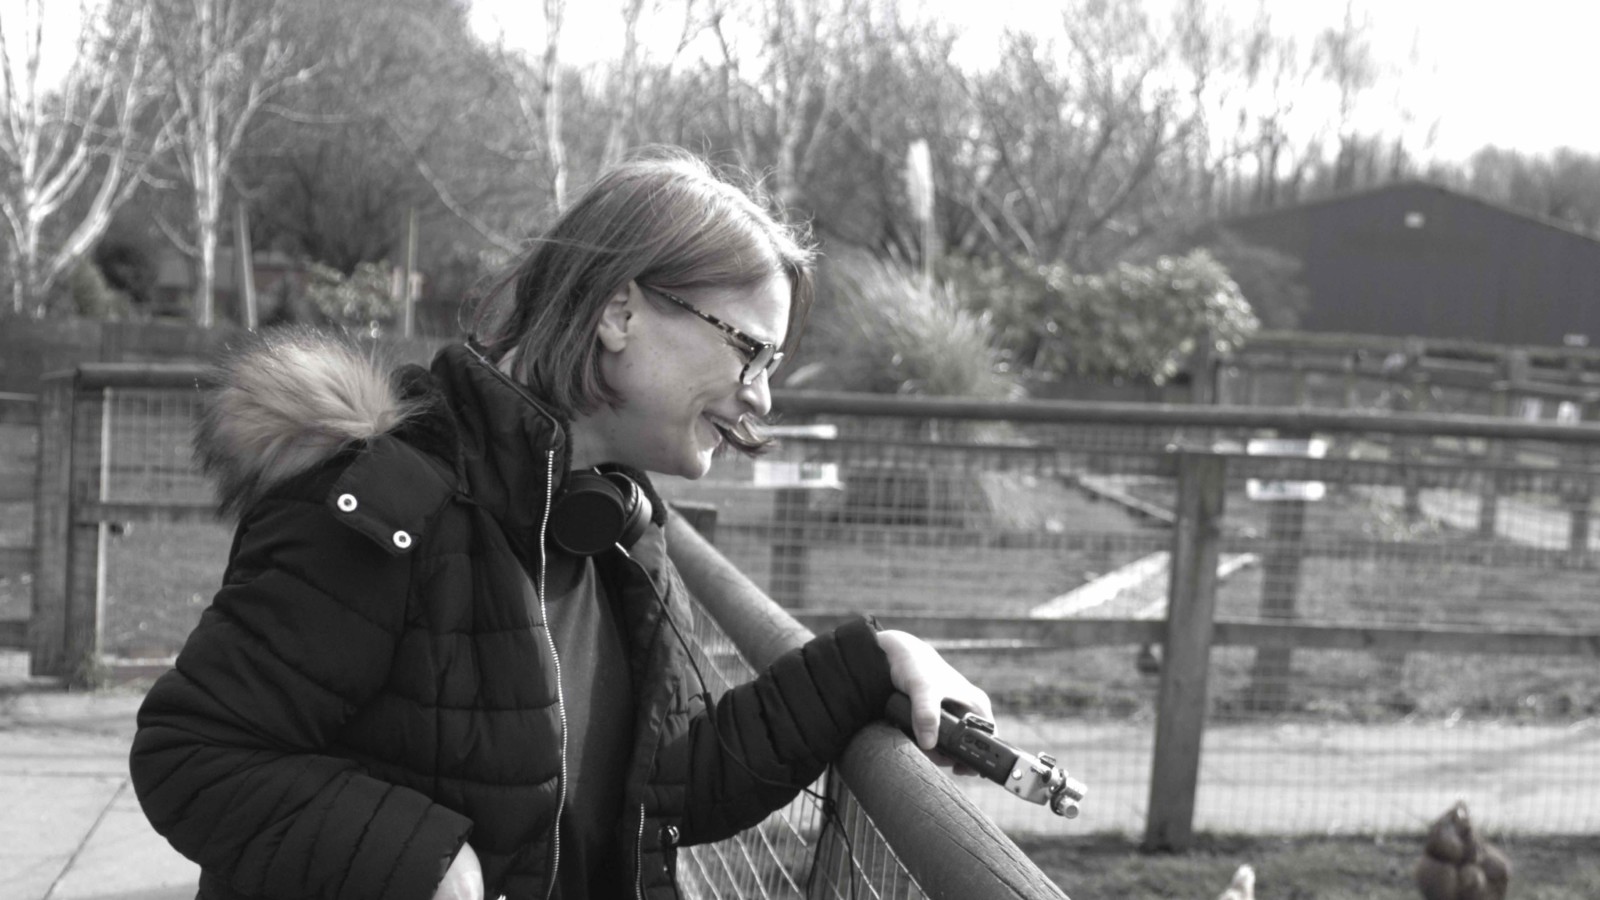 This black and white photo shows a person with light, bob-cut hair, who is wearing glasses and a black coat with a fur trim. The person is learning on a fence into a chicken pen, looking into the pen and holding a zoom recorder in their left hand.